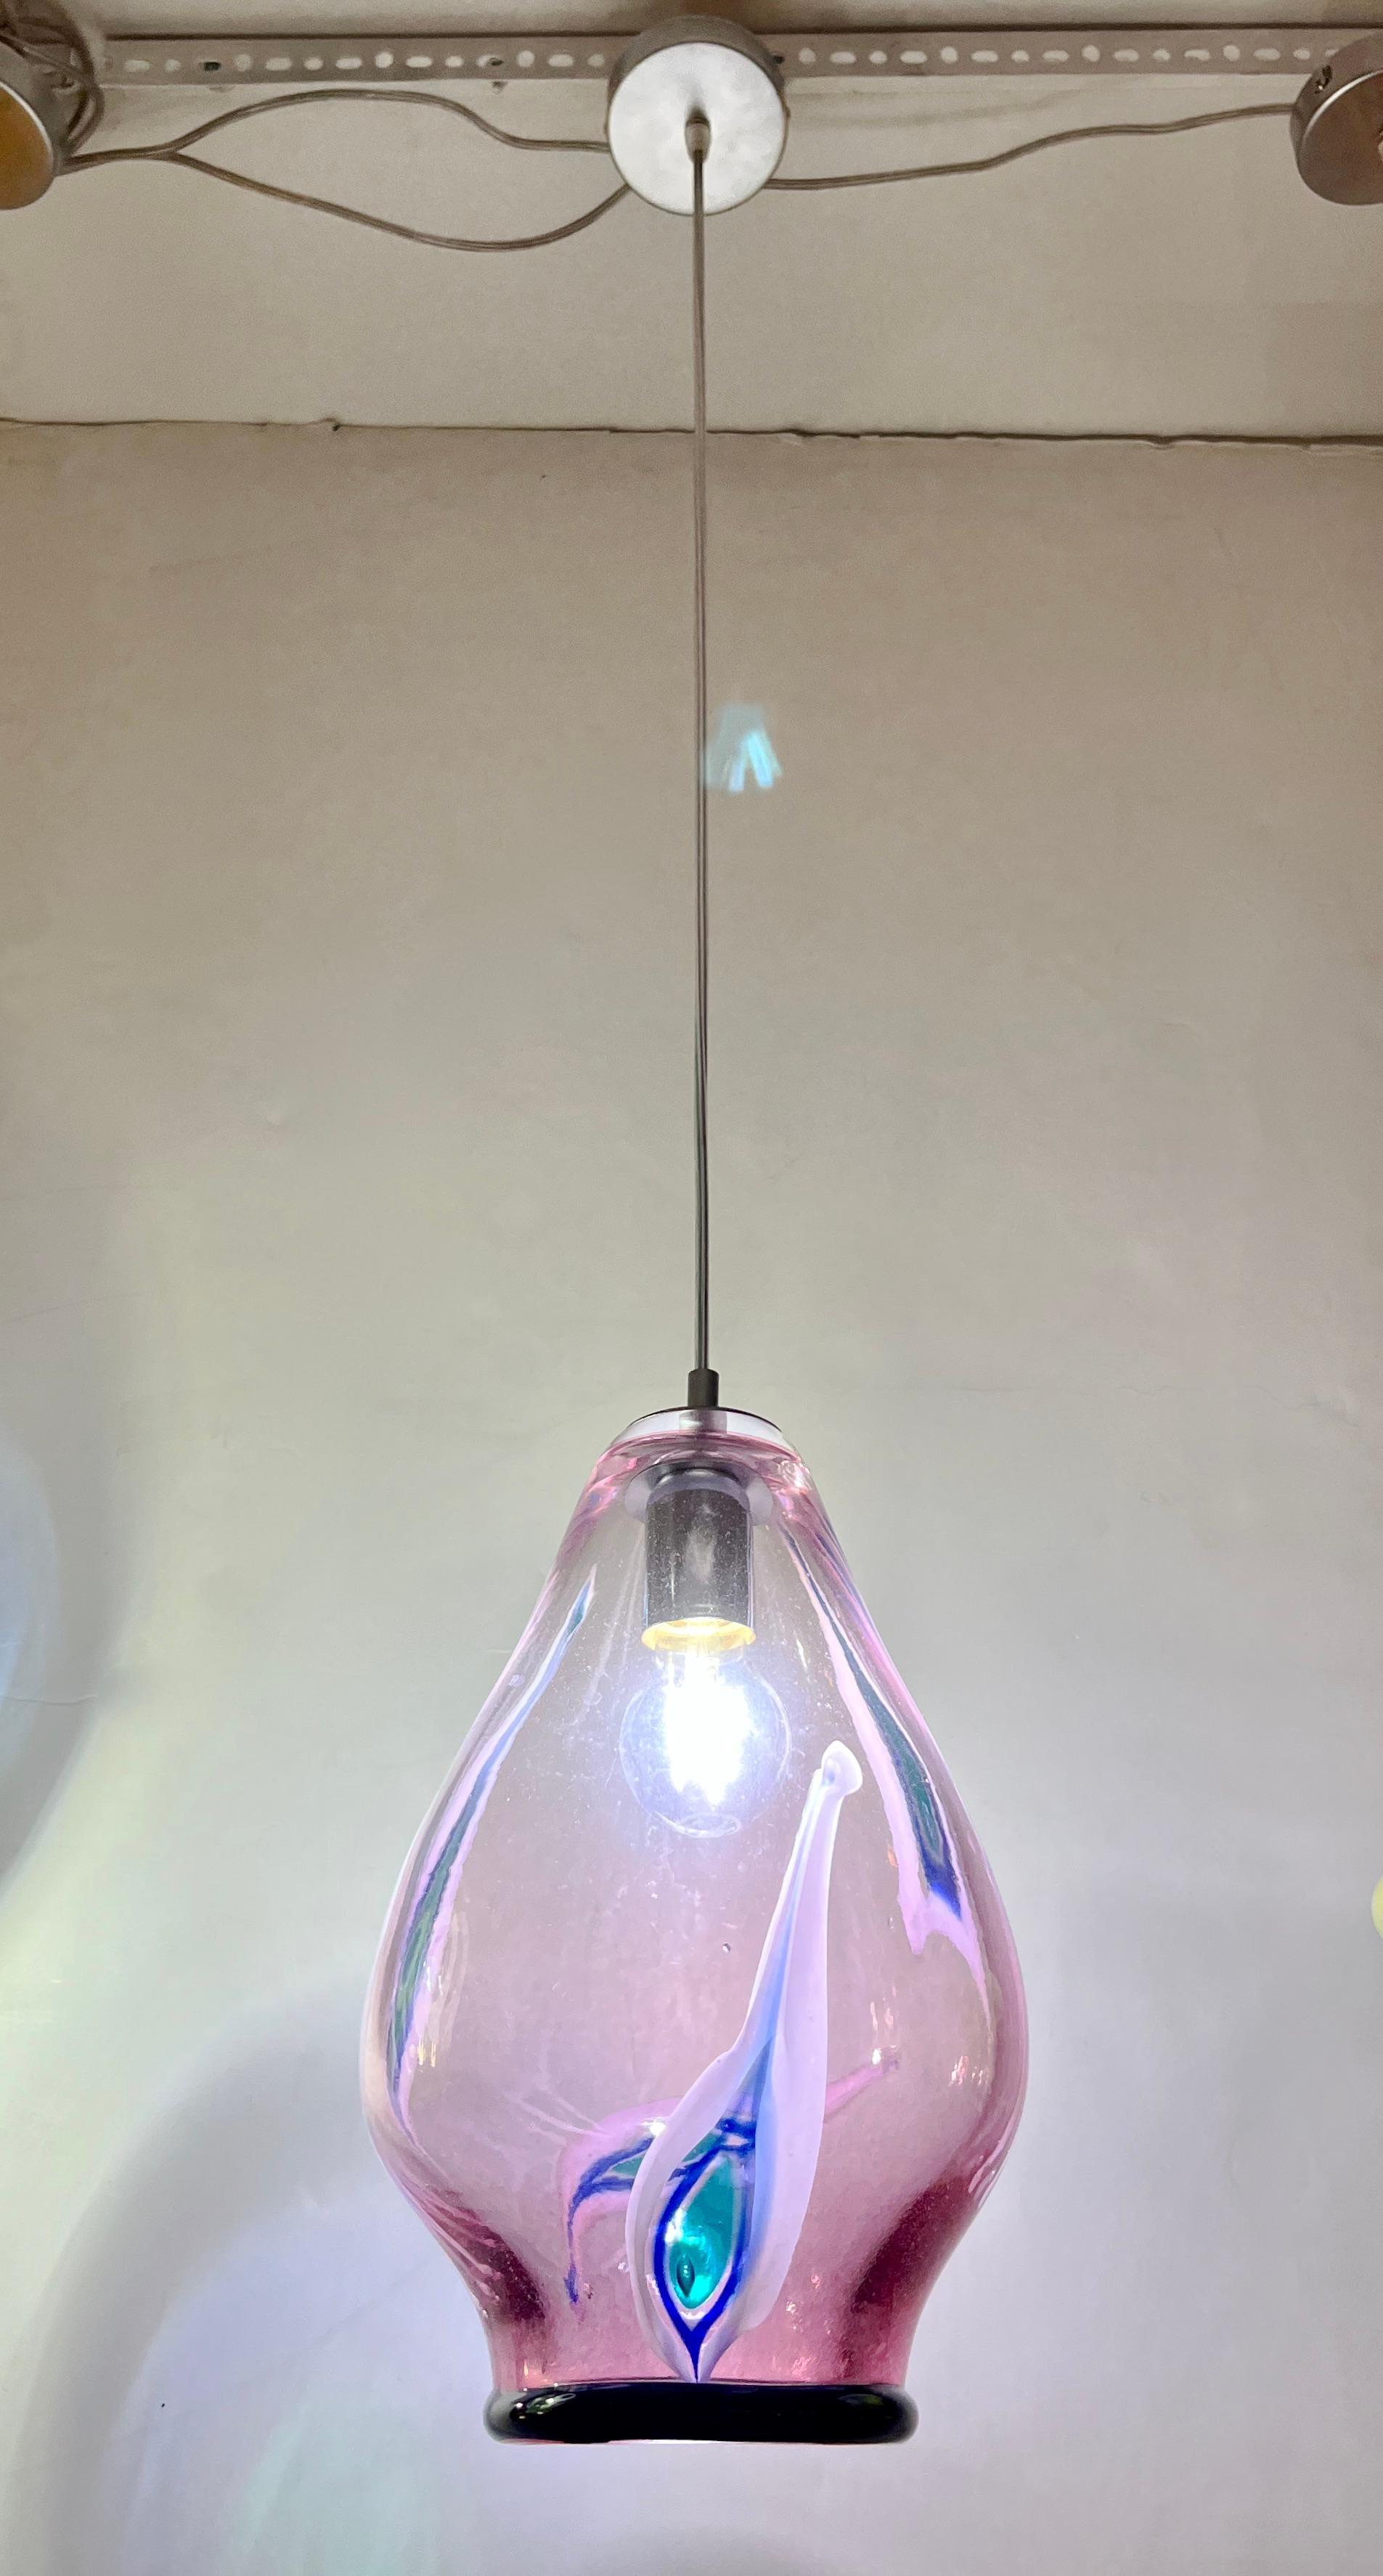 Fun and elegant Italian contemporary custom-made pendant chandelier, of organic modern design, entirely handcrafted with adjustable height, consisting of a sexy curved shade in translucent purple fuchsia blown Murano glass decorated with white, blu,